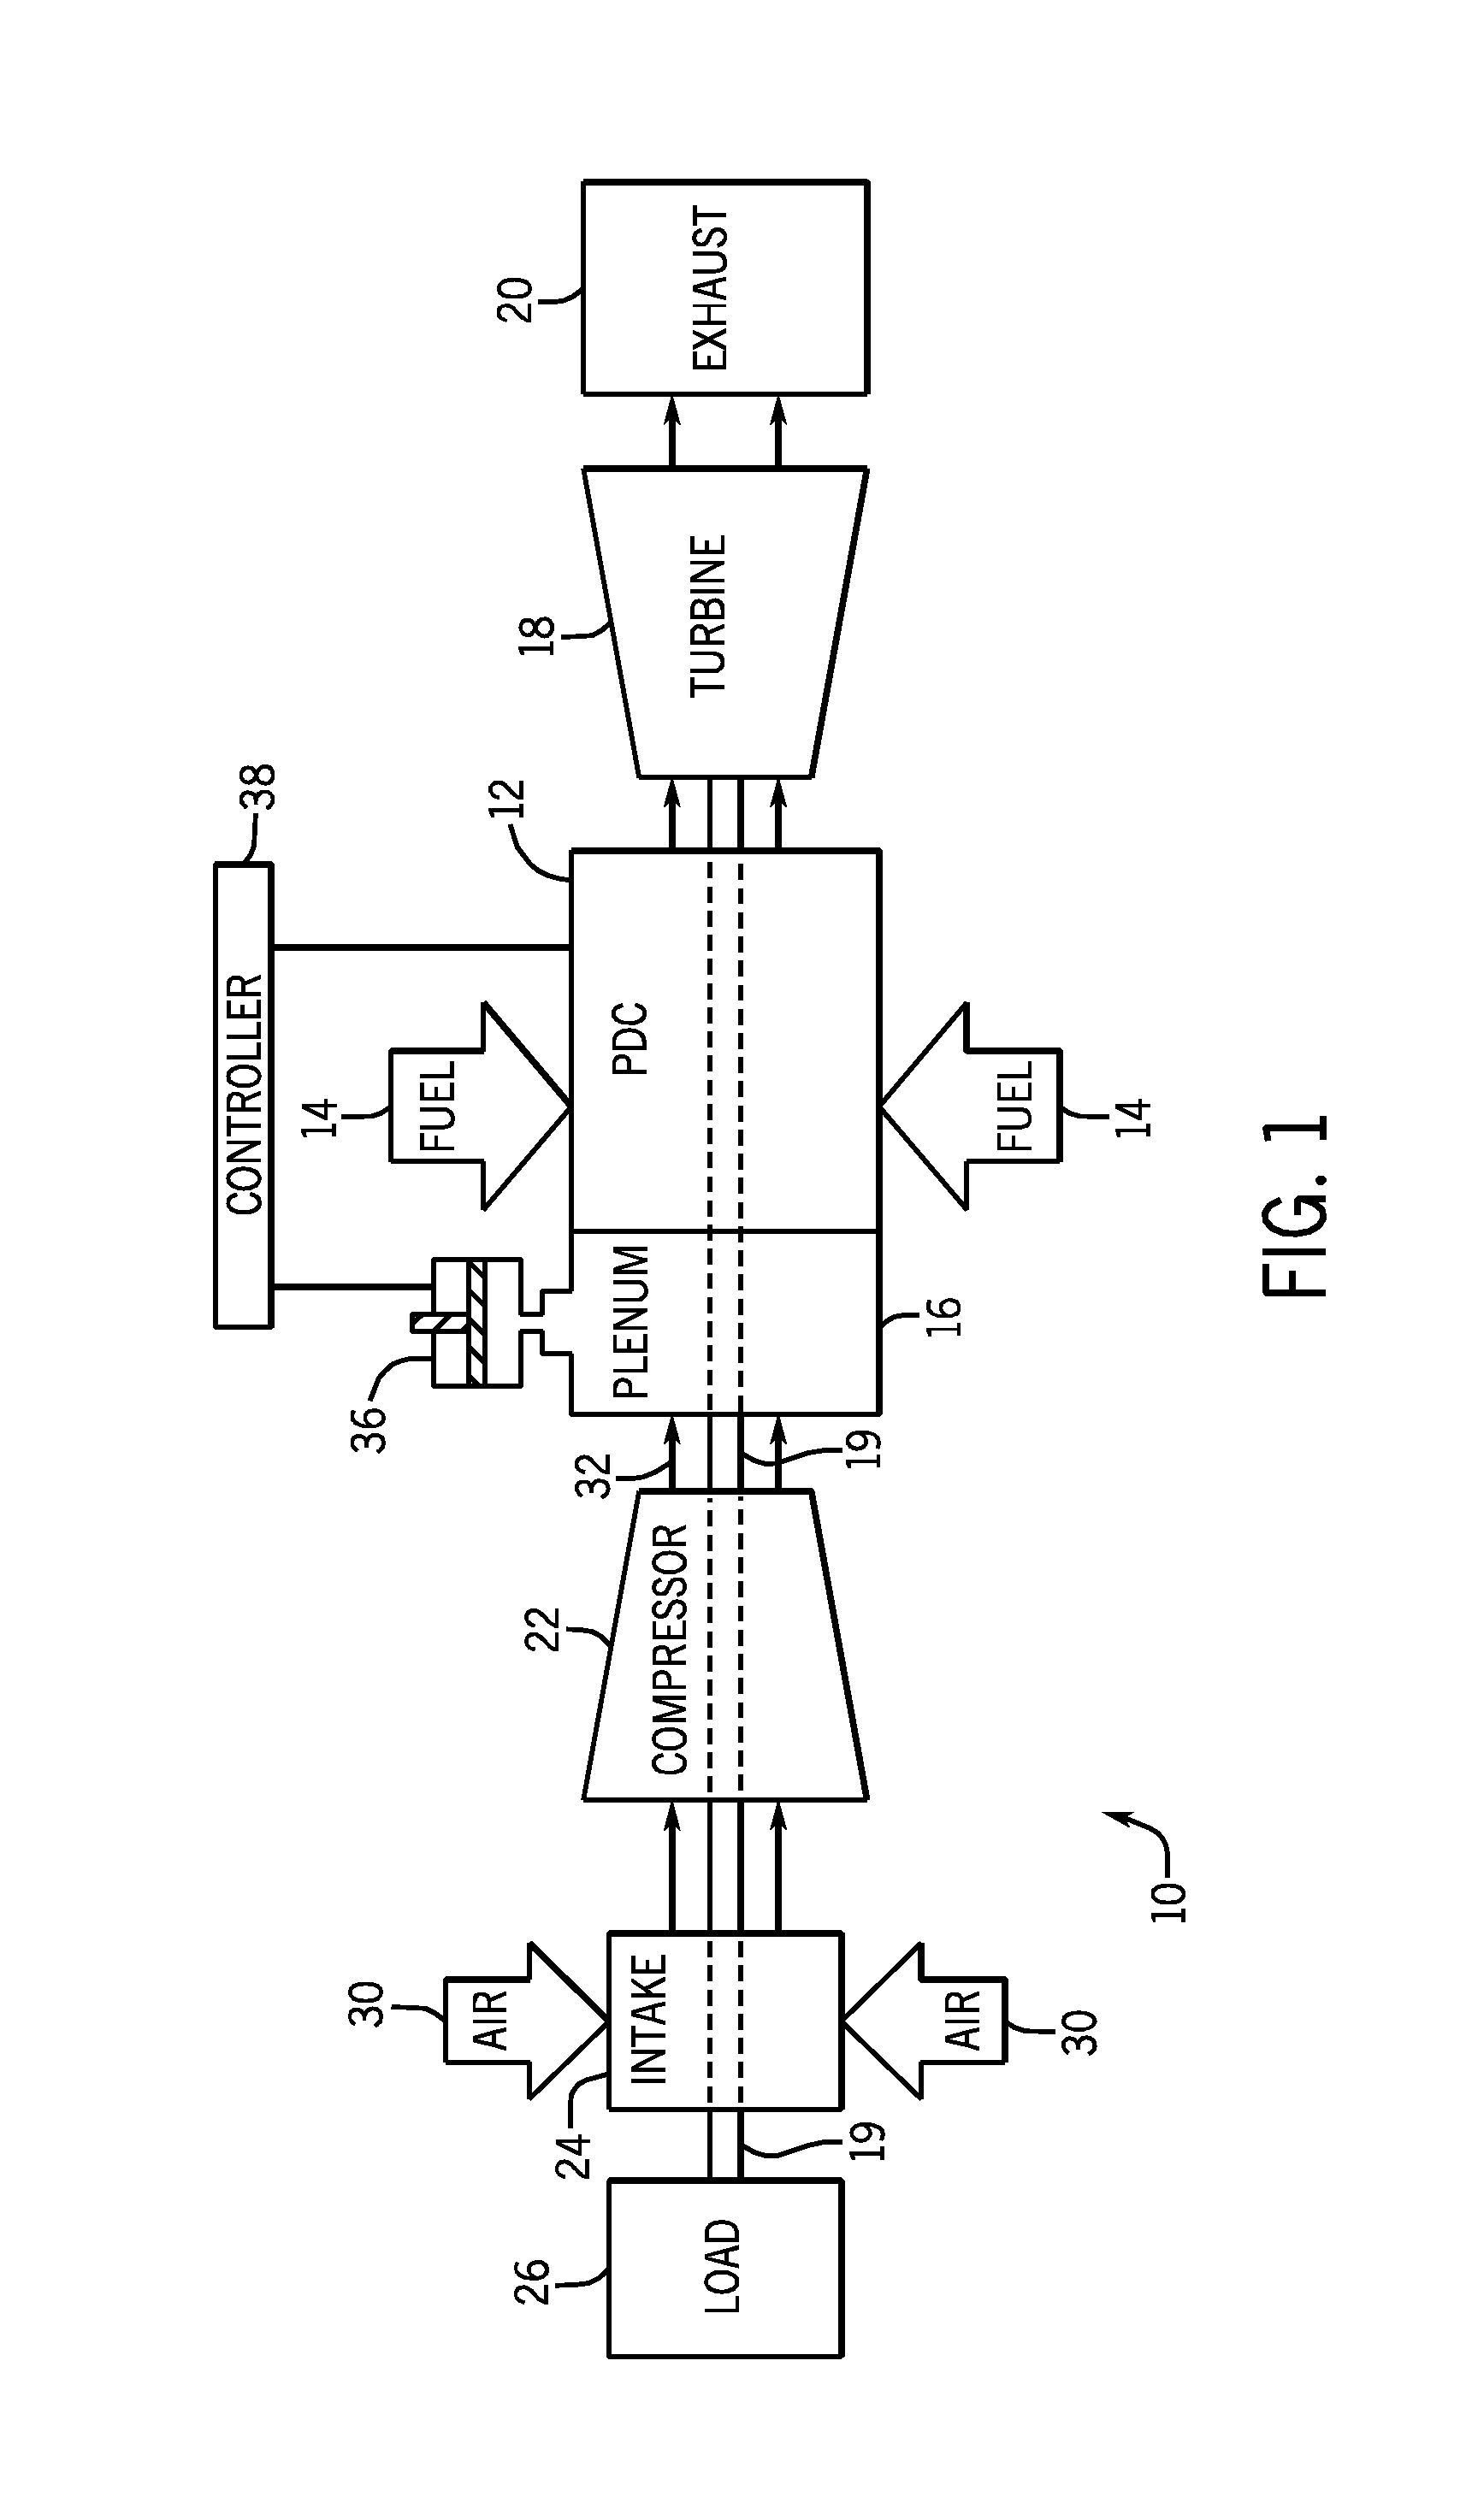 System and method for damping pressure oscillations within a pulse detonation engine